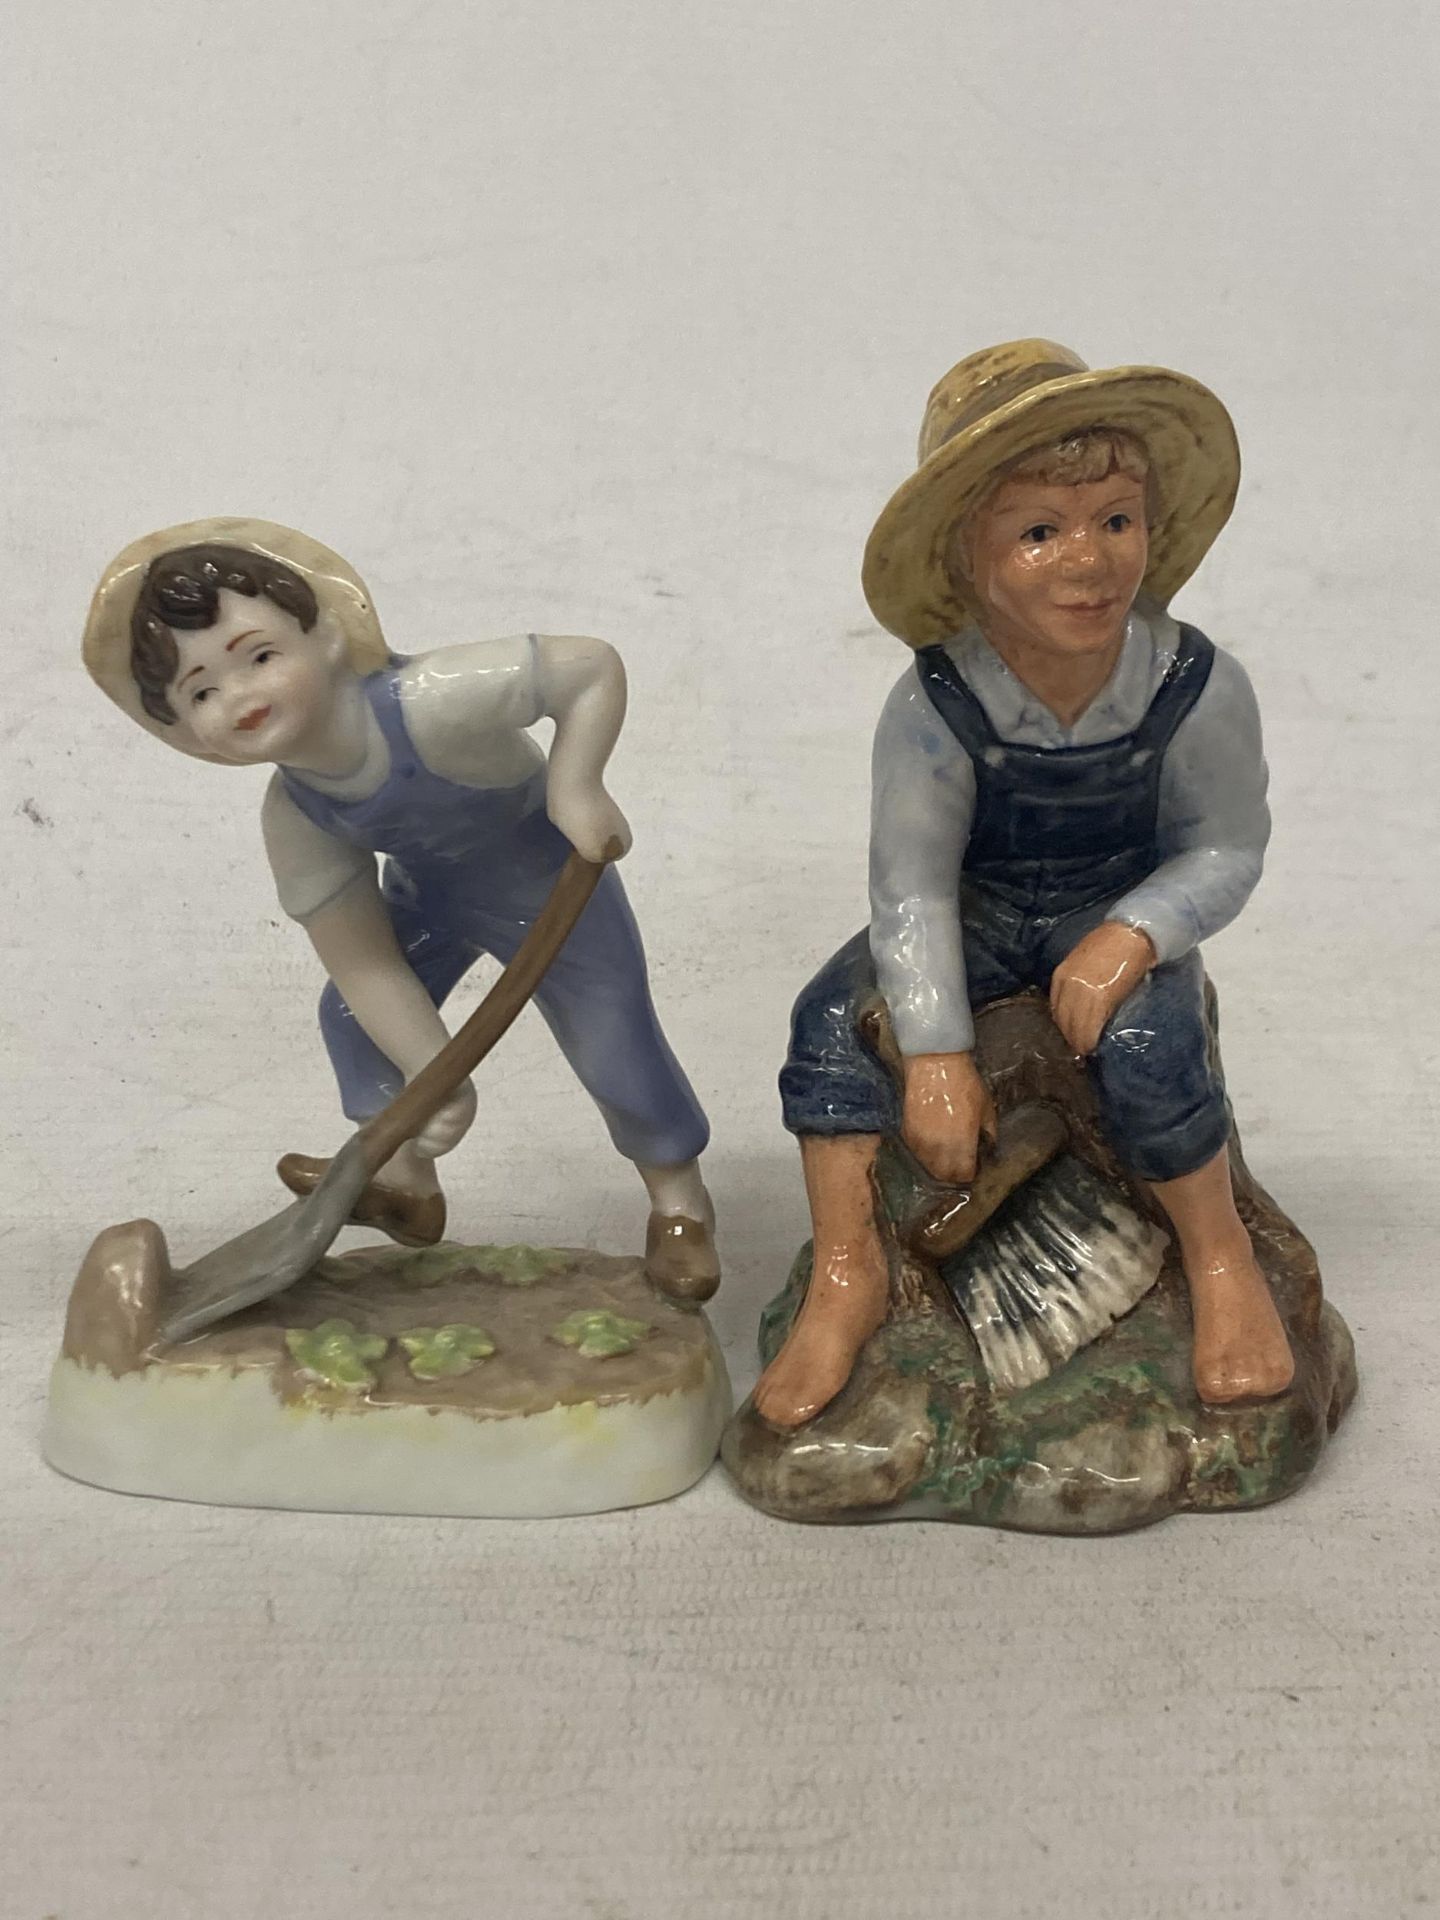 A ROYAL DOULTON FIGURE OF TOM SAWYER HN 2926 TOGETHER WITH A ROYAL WORCESTER FIGURE FROM THE